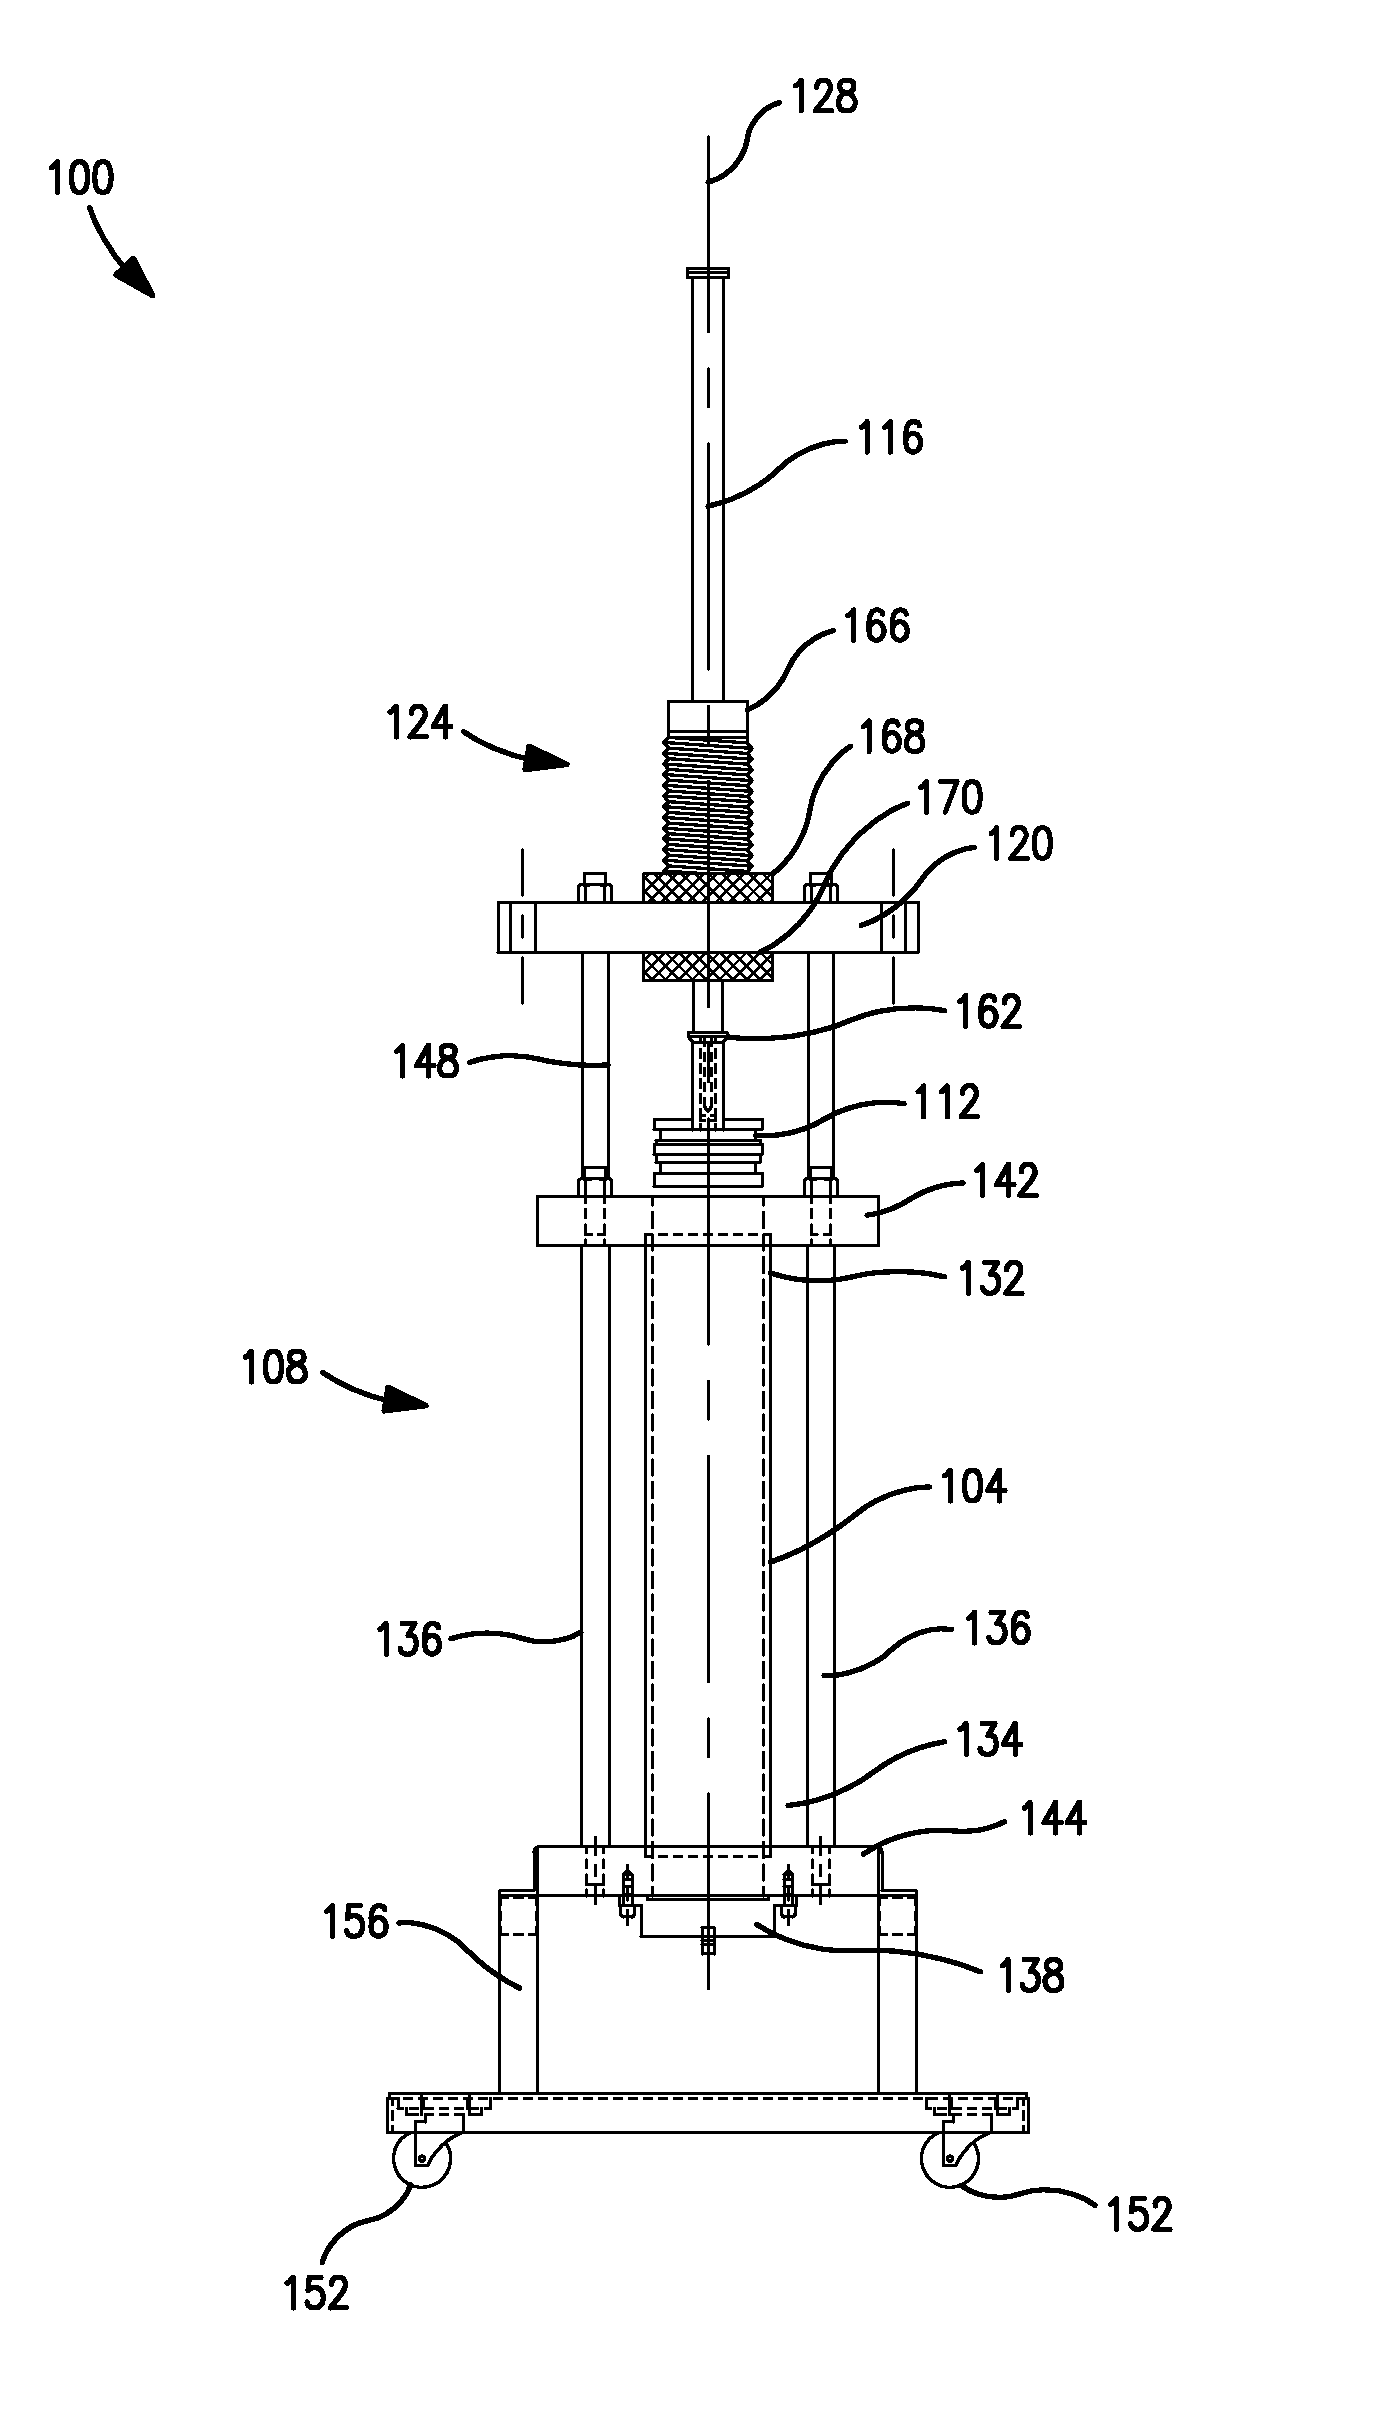 Apparatus and methods for packing chromatography columns